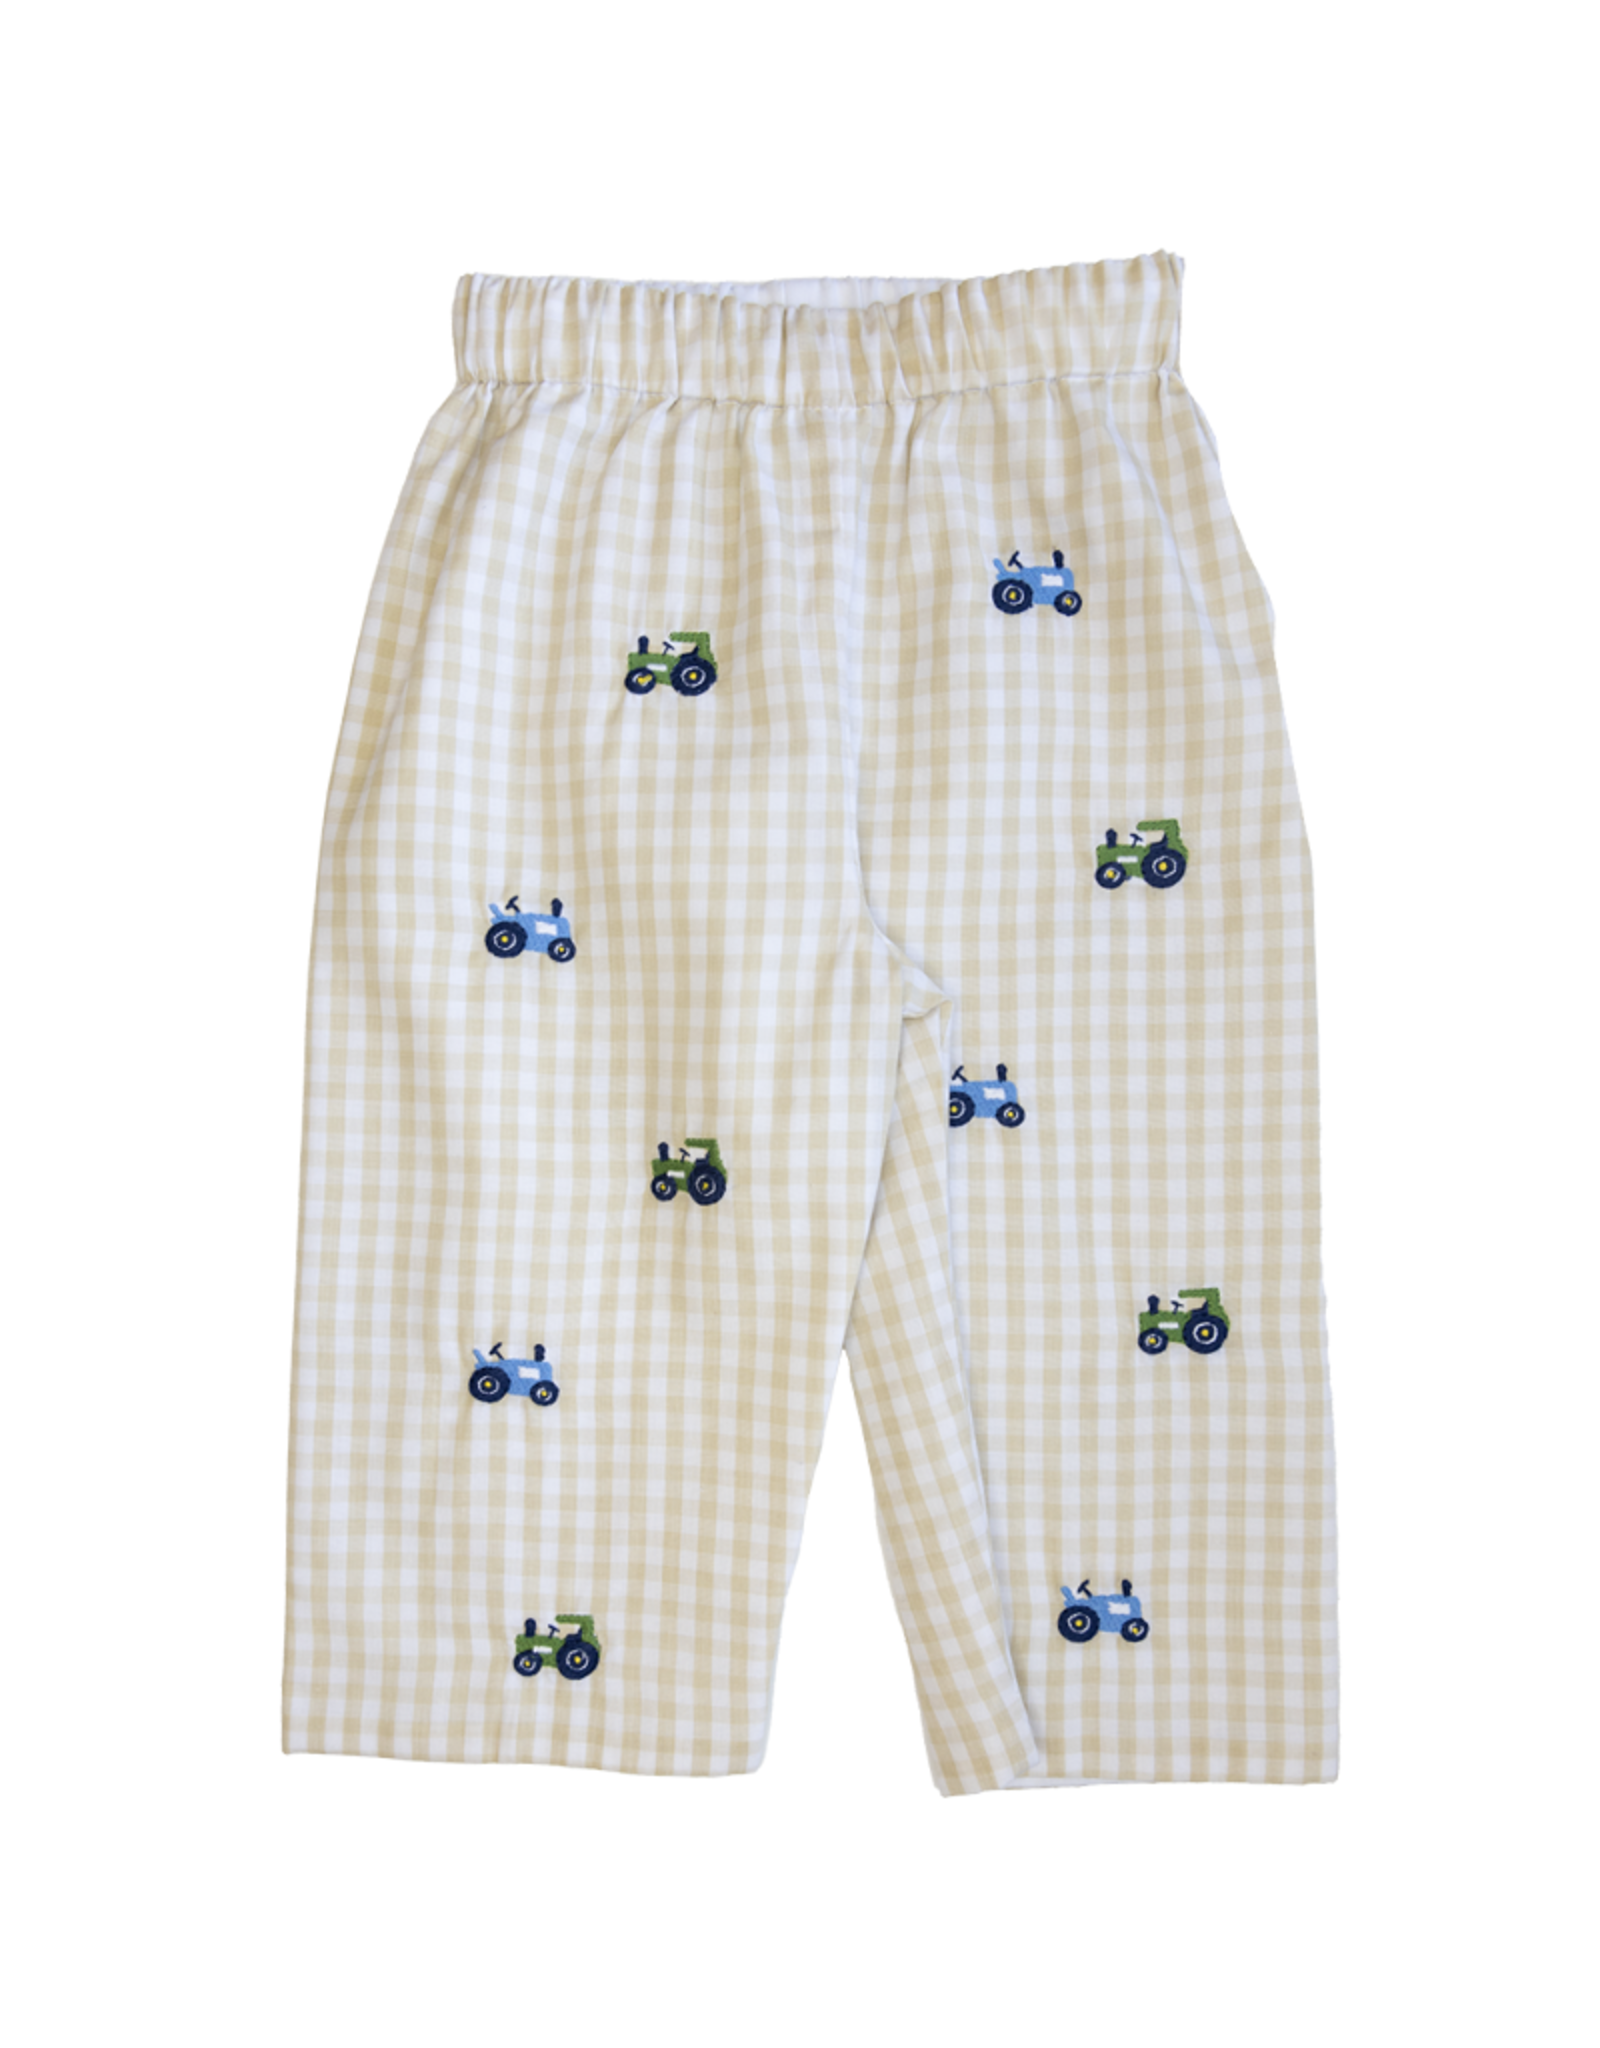 Zuccini ZEF23 Embroidered Tractors Pant